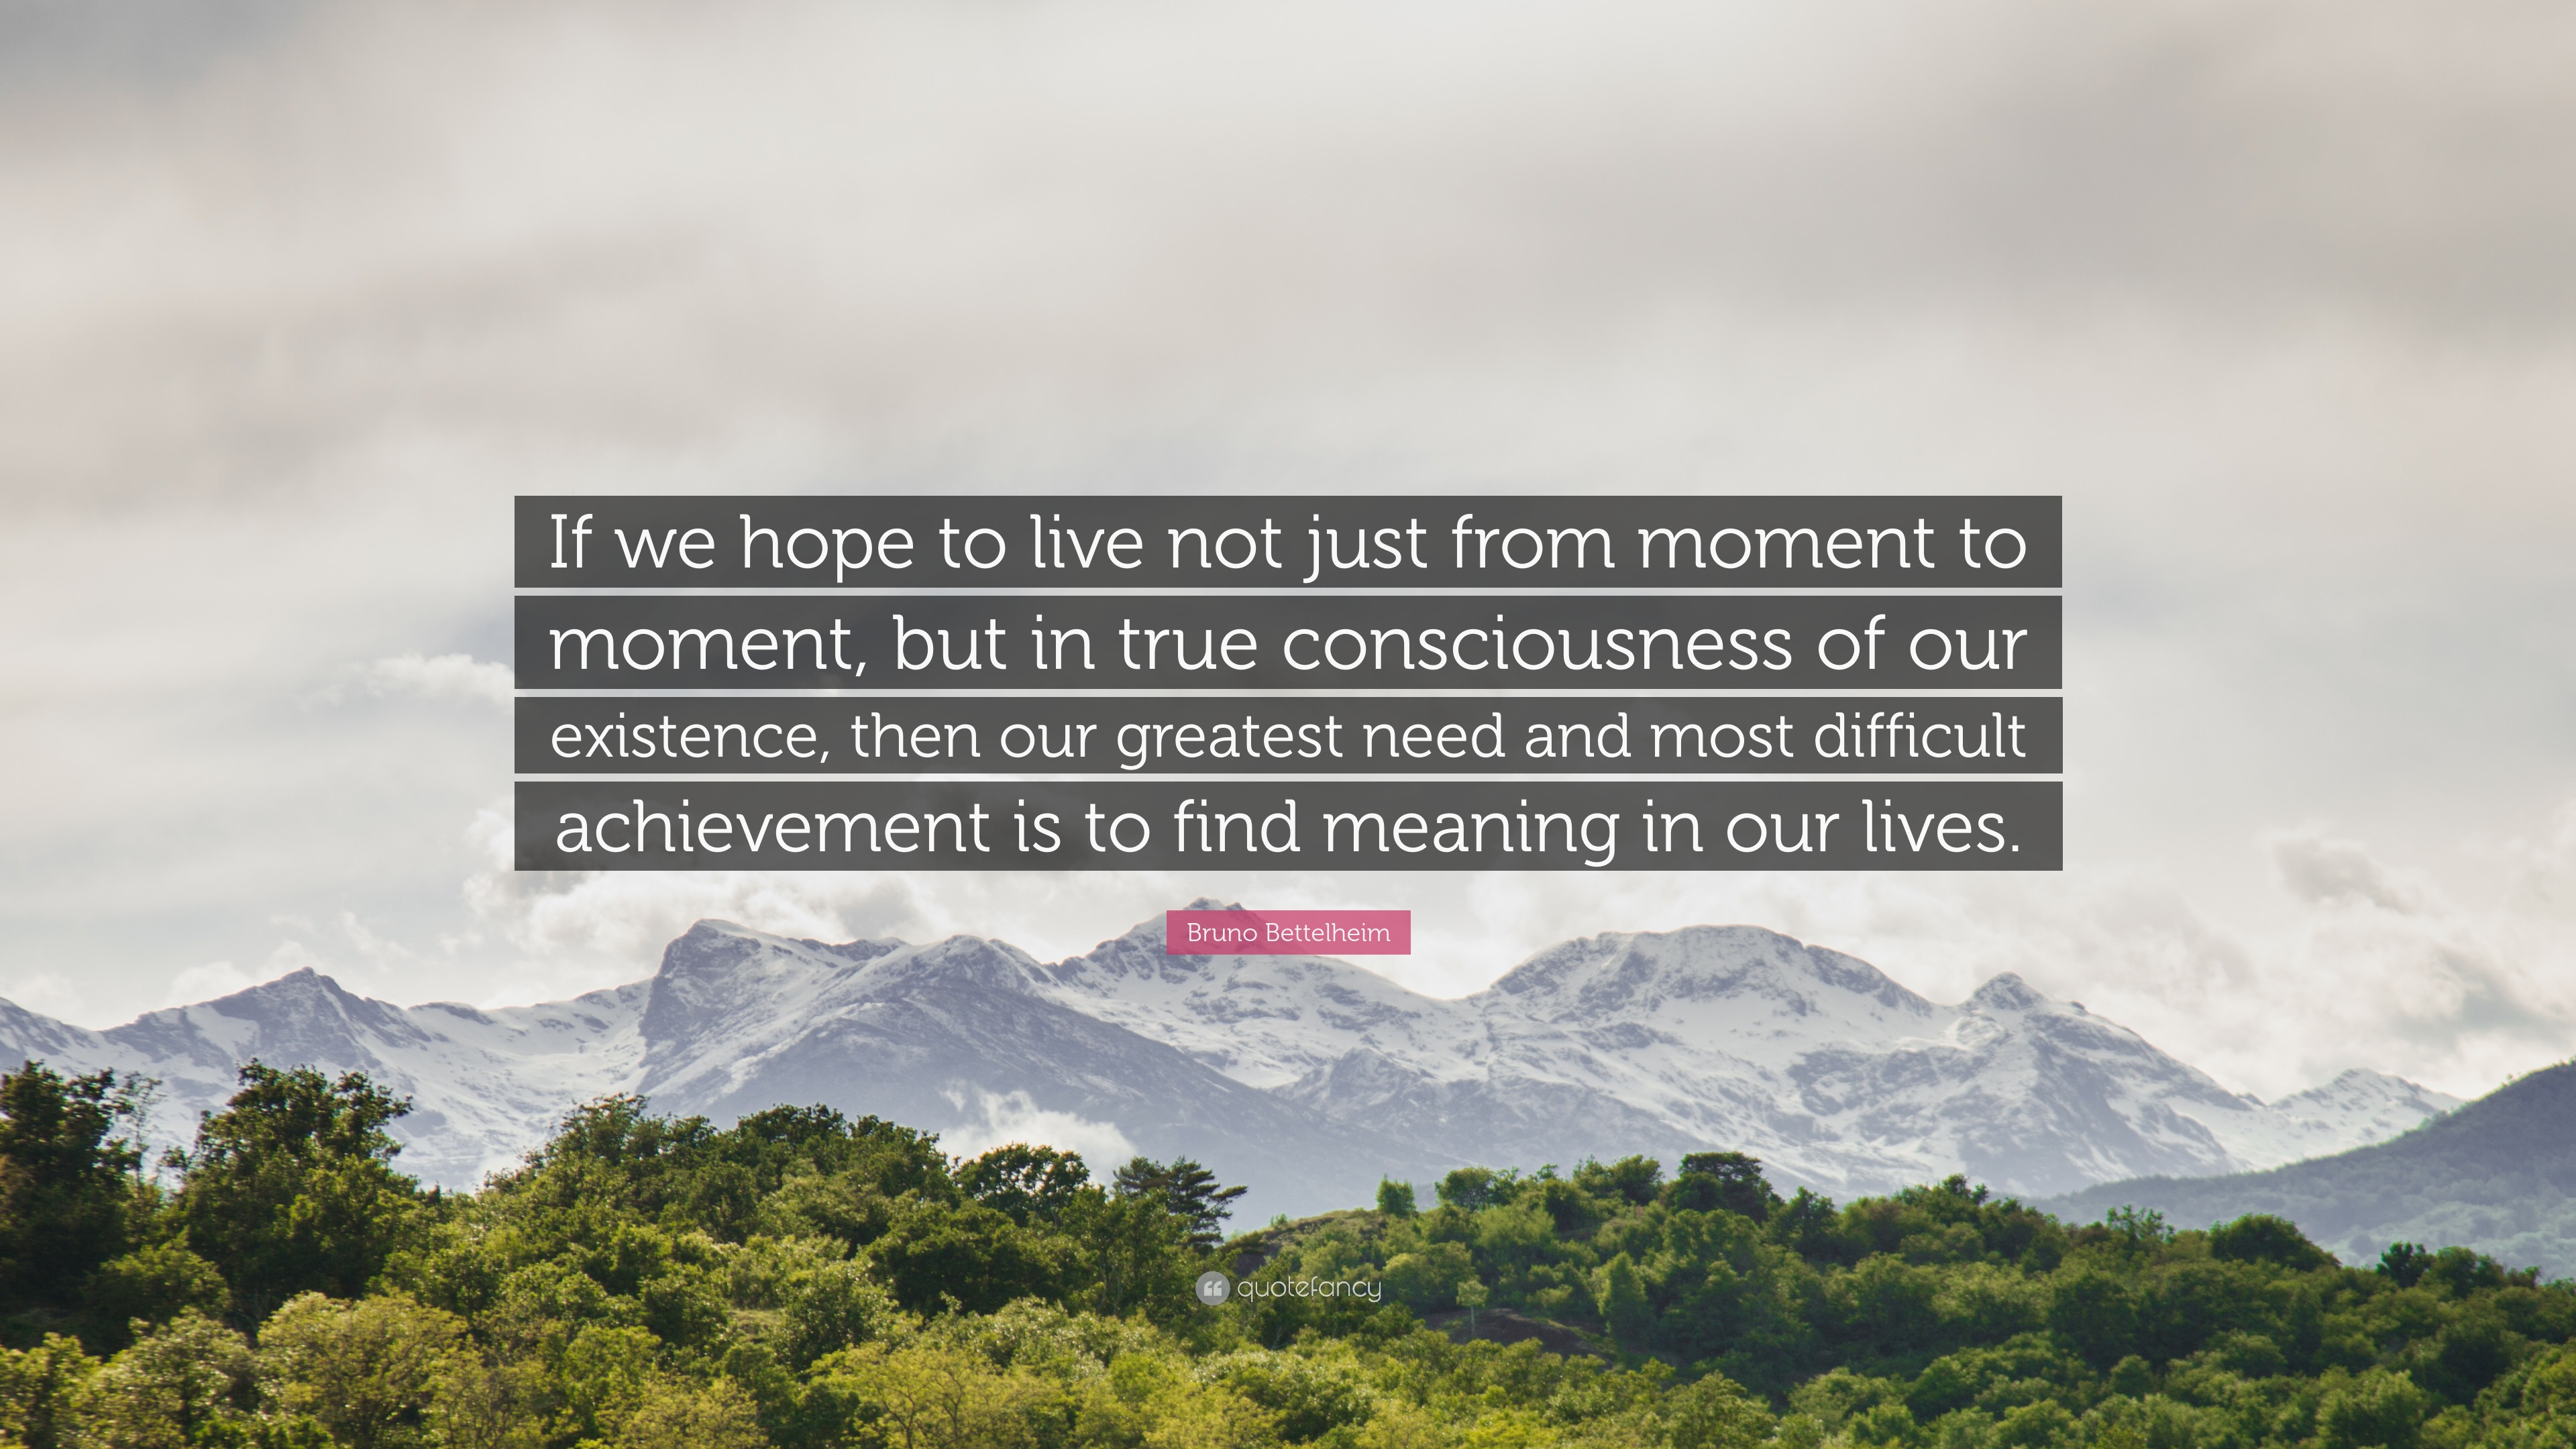 Living In The Moment: What Does It Truly Mean?